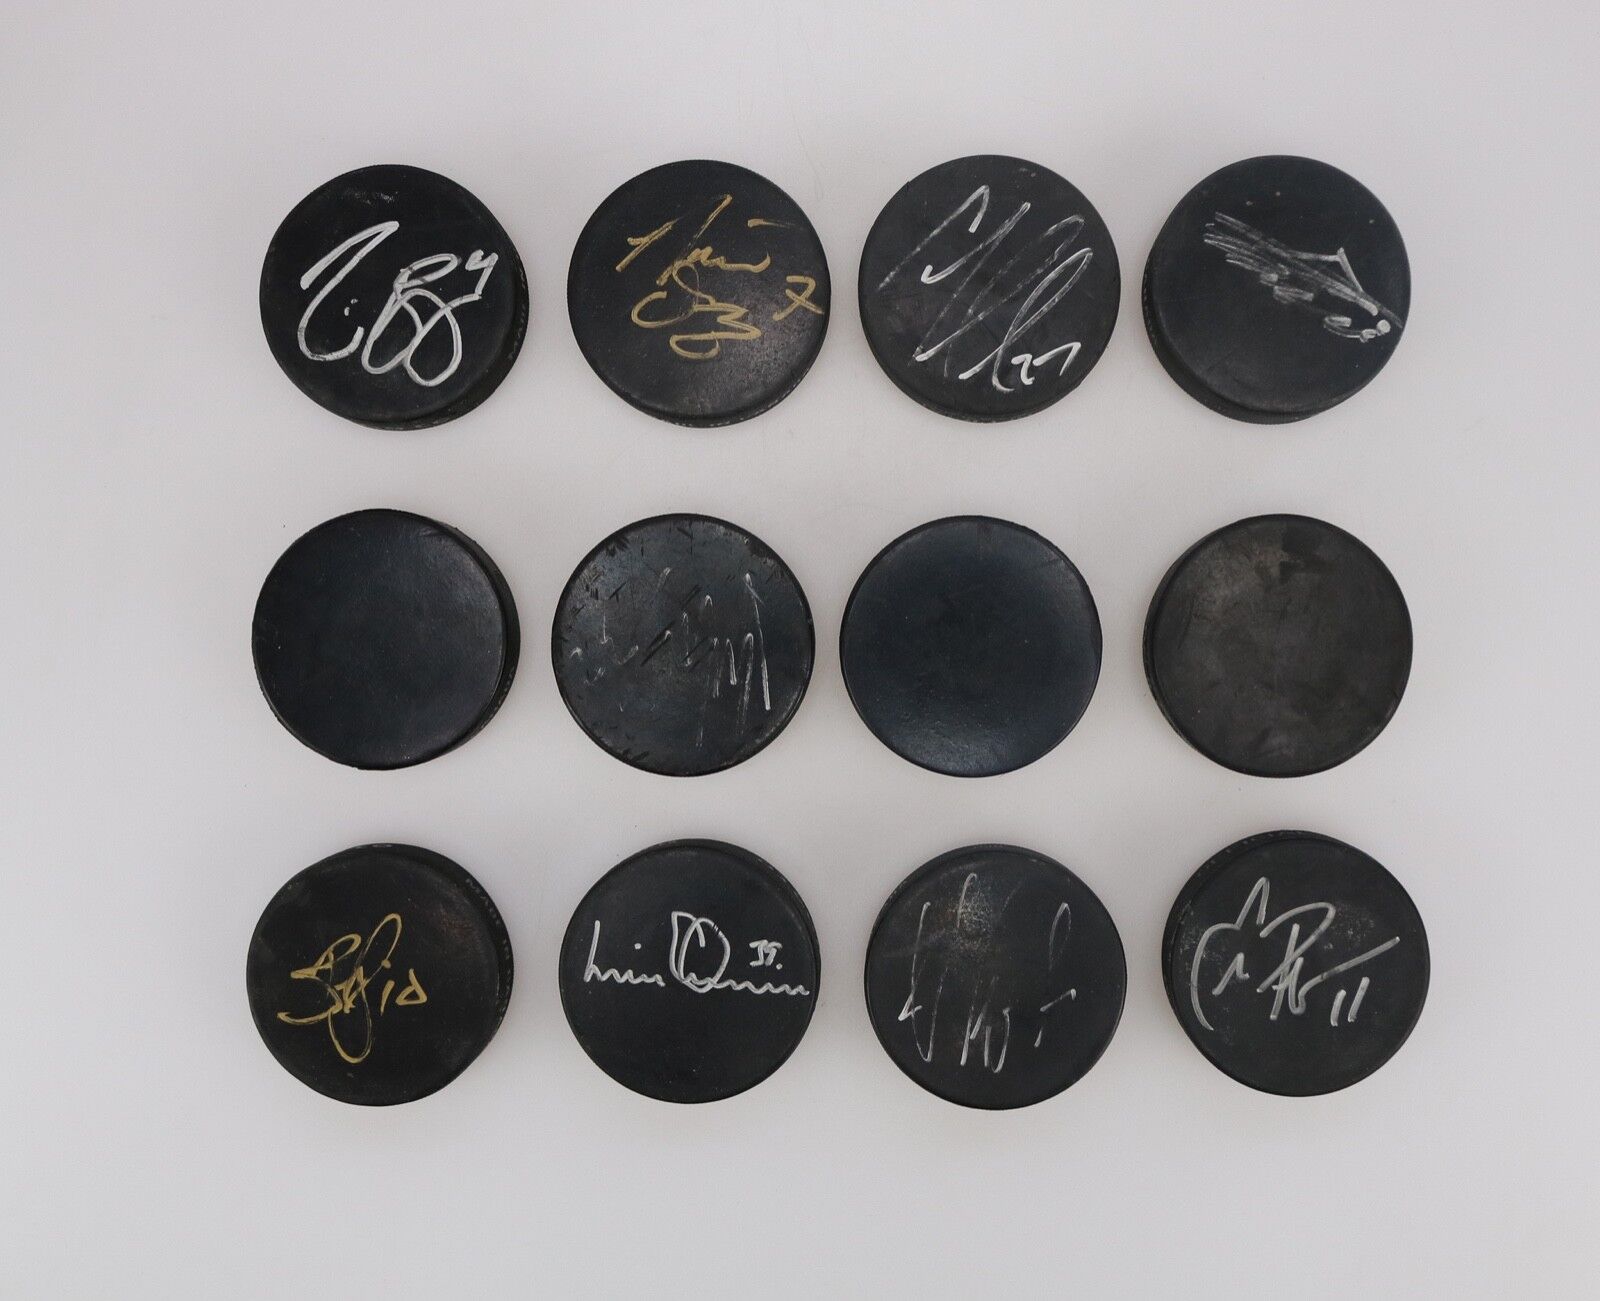  Hockey Official Practice Puck NHL Lot 12 Autograph Made in Canada InGlass Co InGlas Co.